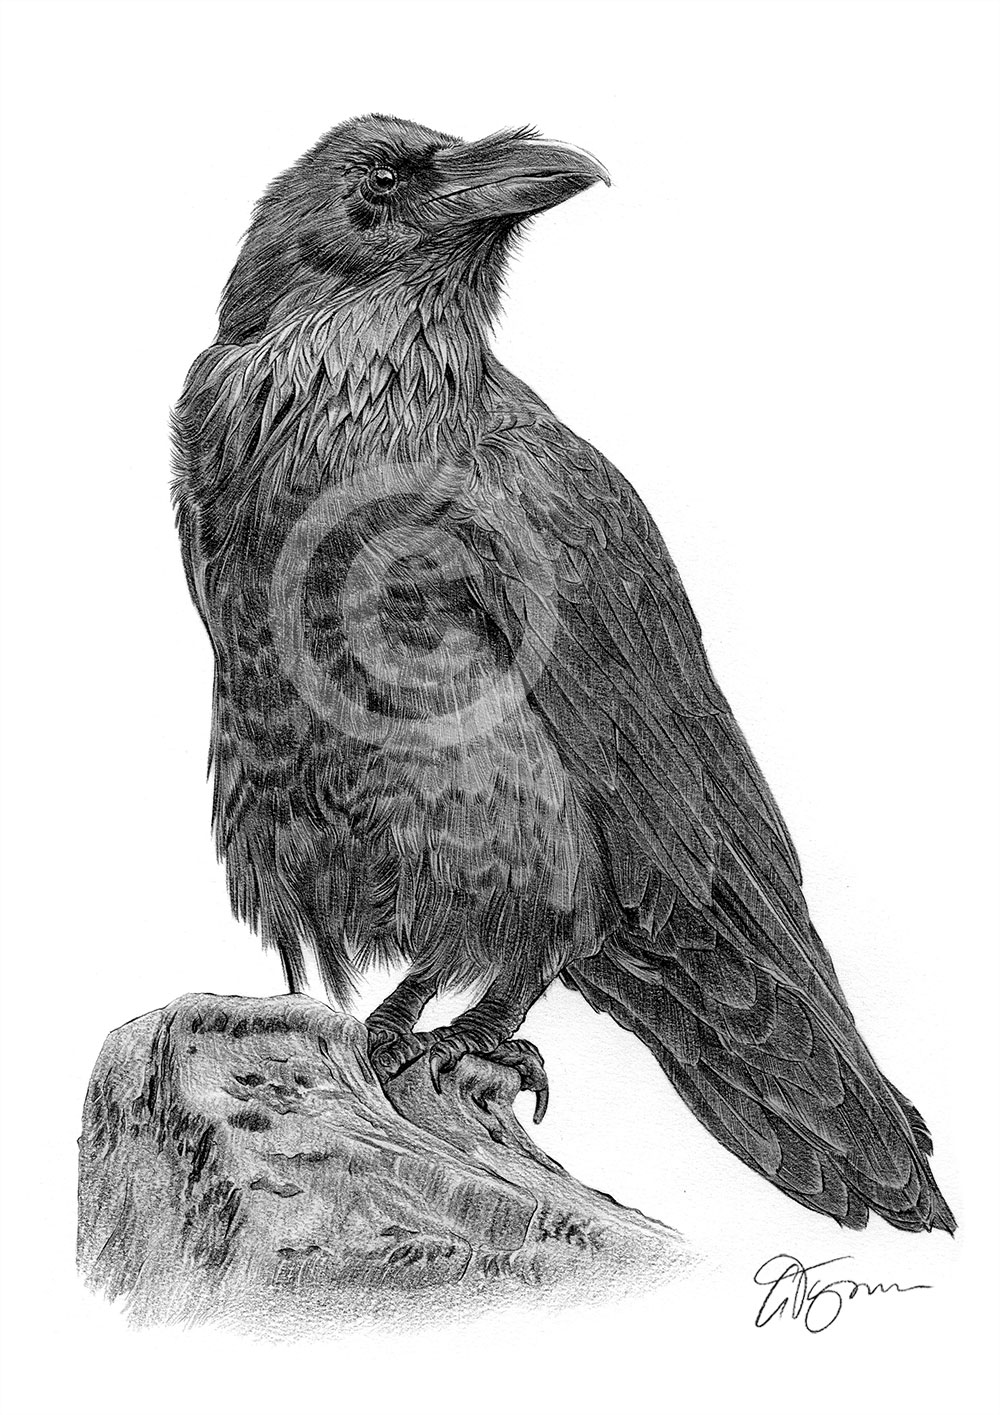 Pencil drawing of a raven by artist Gary Tymon